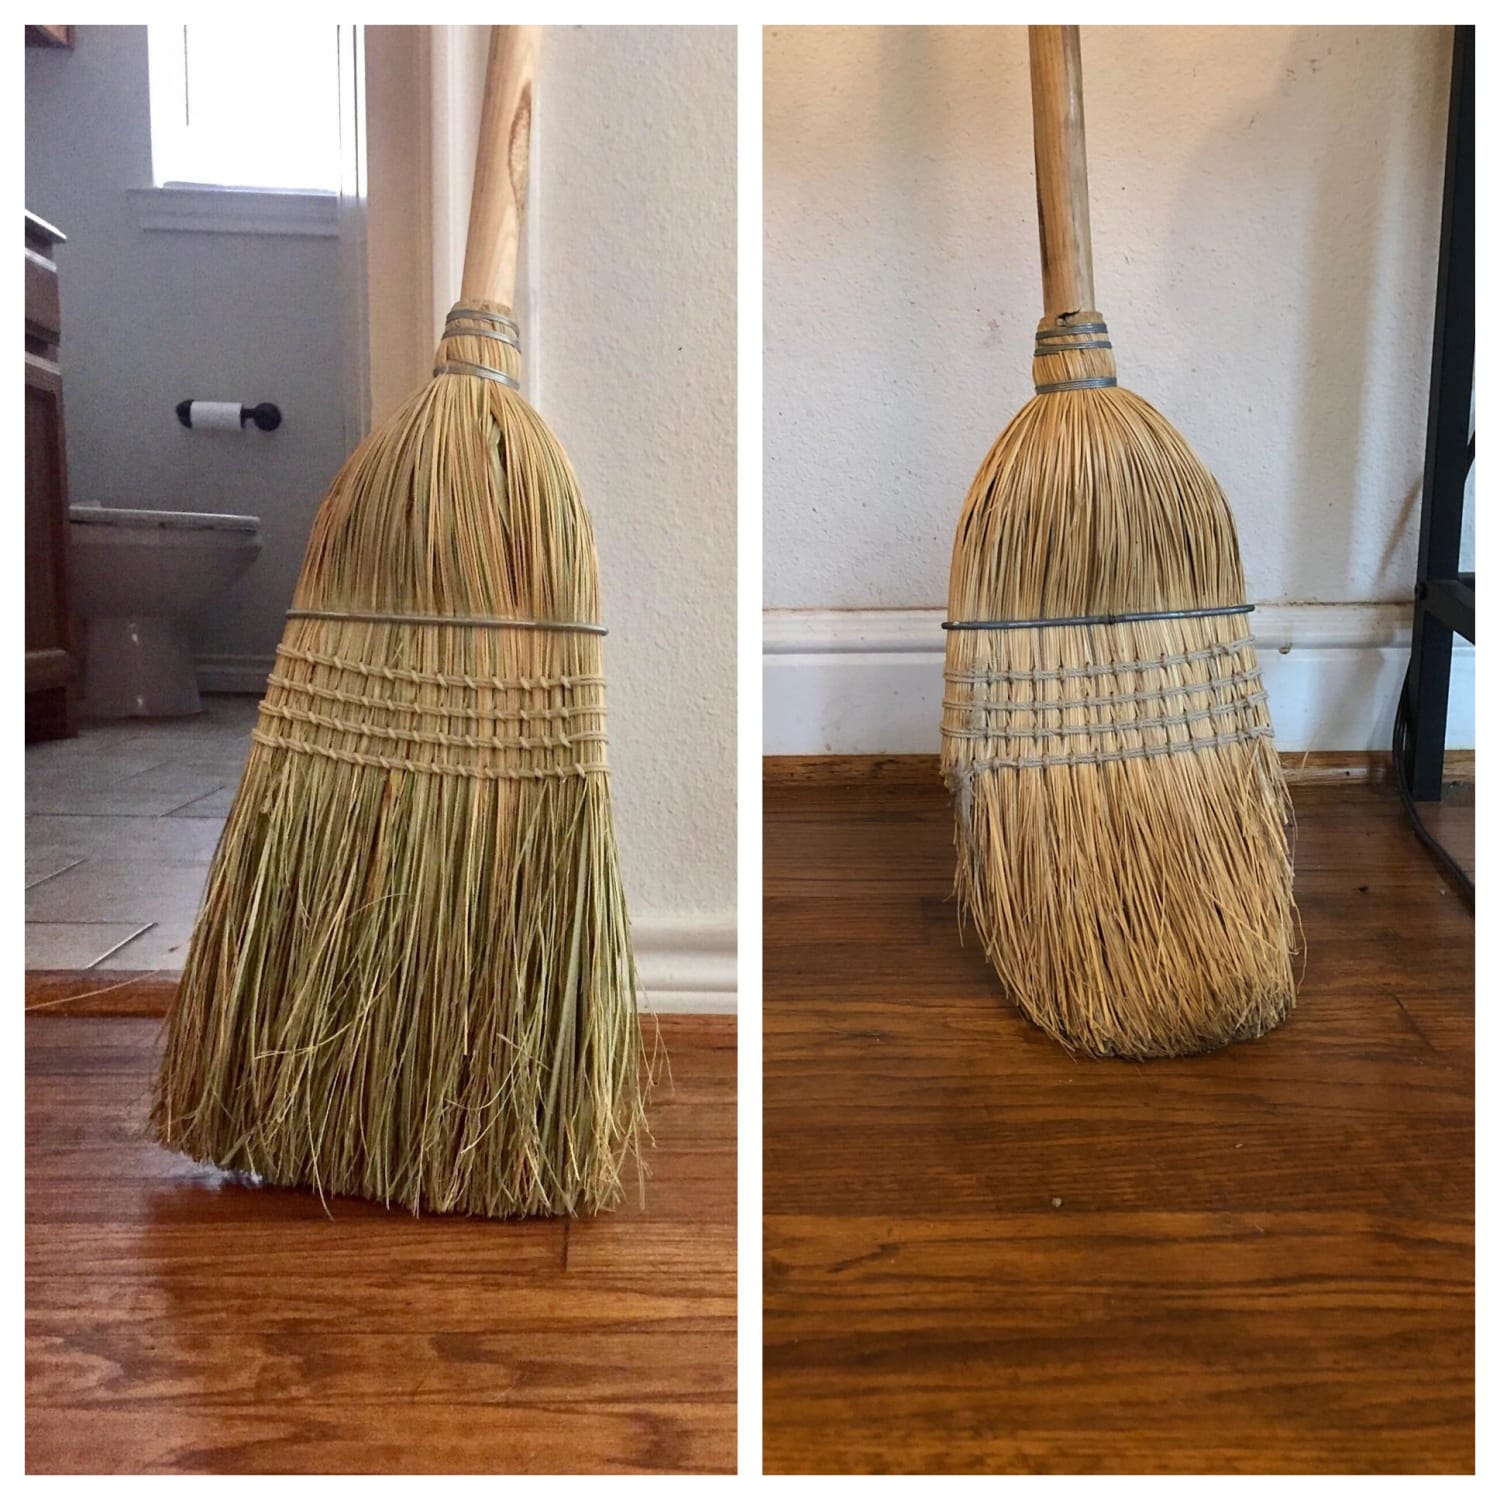 For those that said I had cut my broom to look worn on my previous post, this is the new one after two years or so. This is a corn straw broom only on wood floors and stone patio and deteriorates over time. The angle of wear is because you sweep at an angle not up and down.